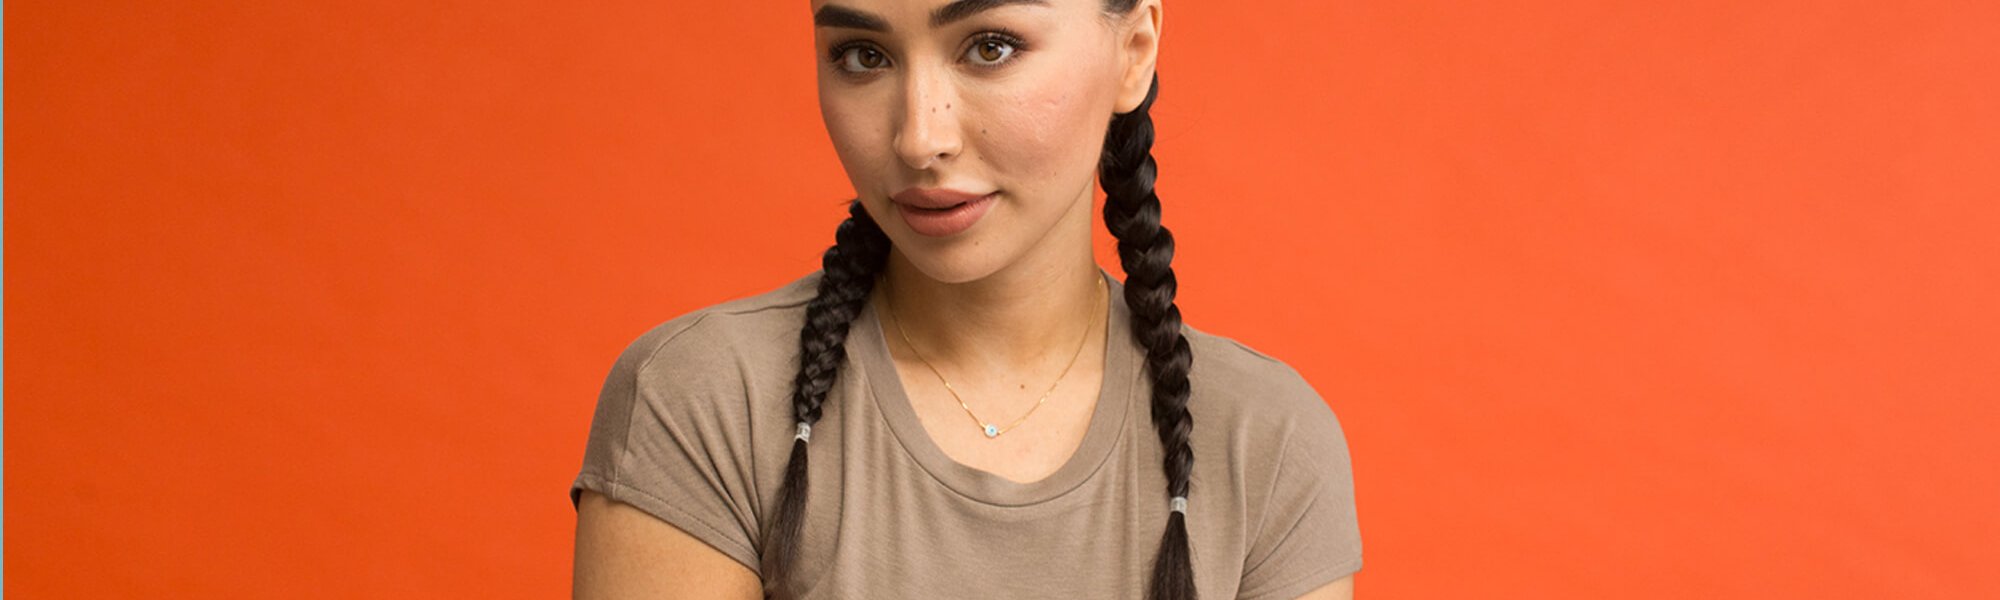 How To Style Boxer Braids For A Workout Or A Night Out